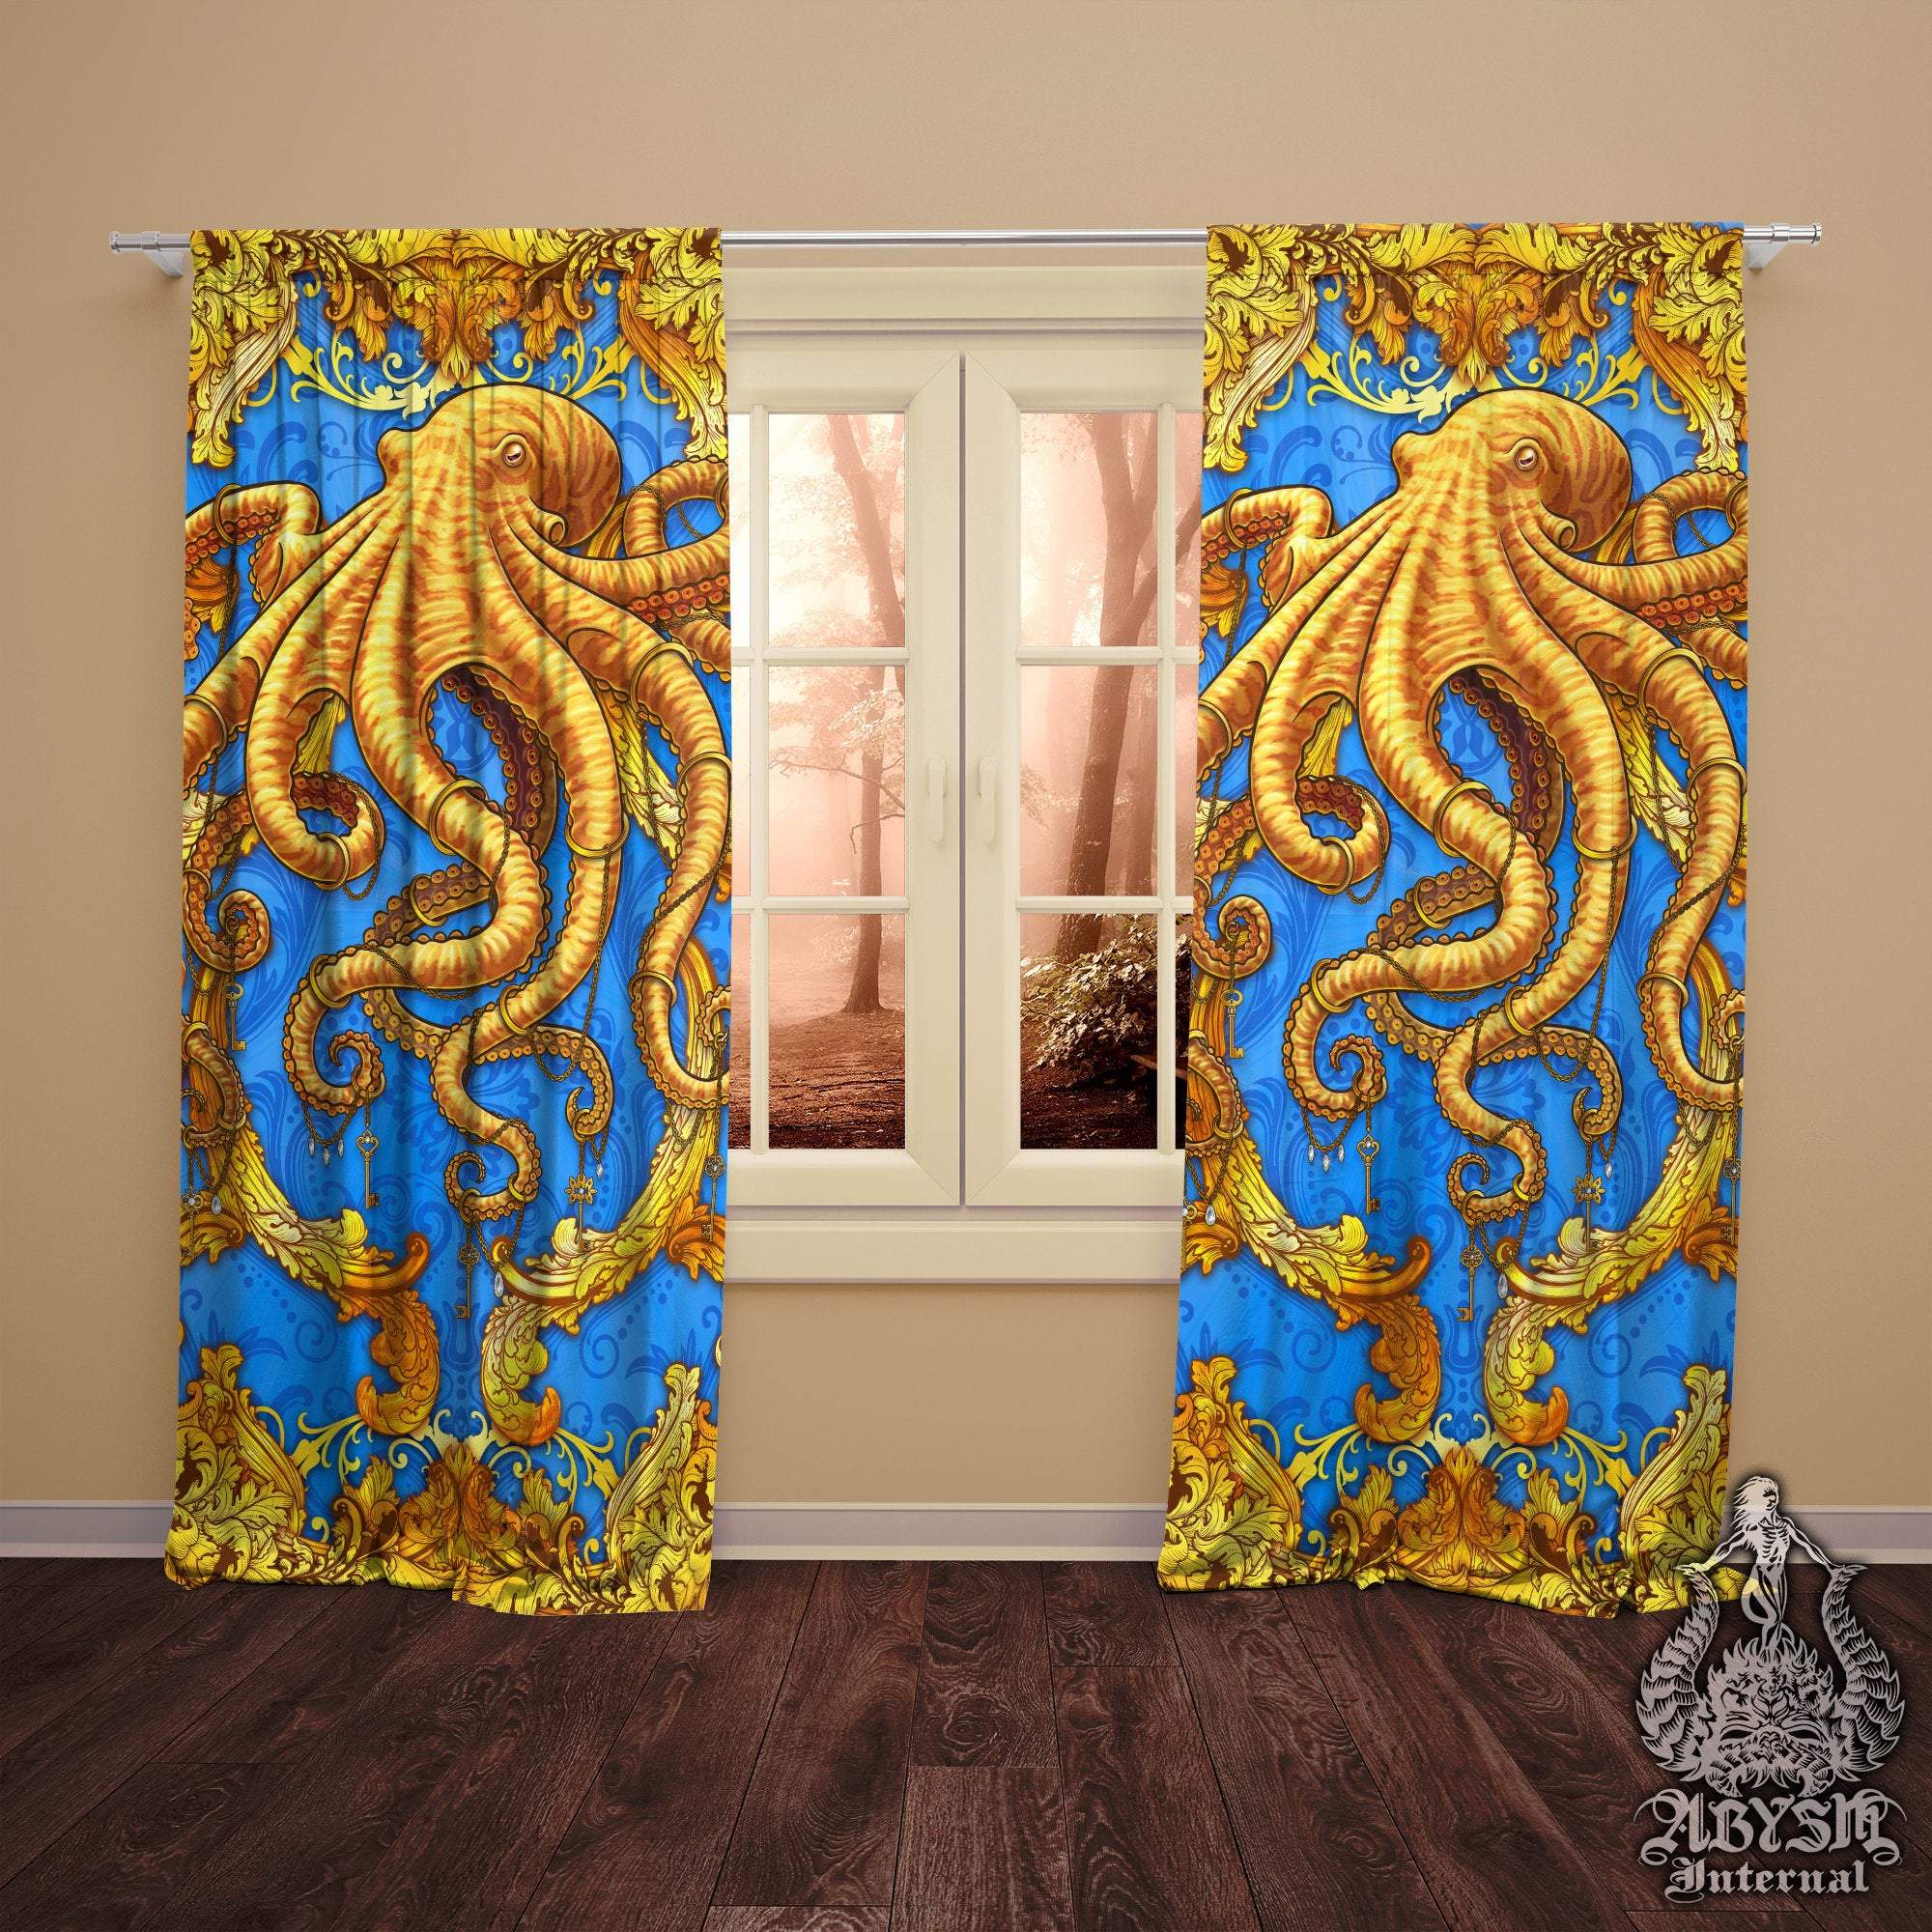 Octopus Blackout Curtains, Long Window Panels, Beach Indie Room Decor, Art Print, Funky and Eclectic Home Decor - Cyan & Gold - Abysm Internal